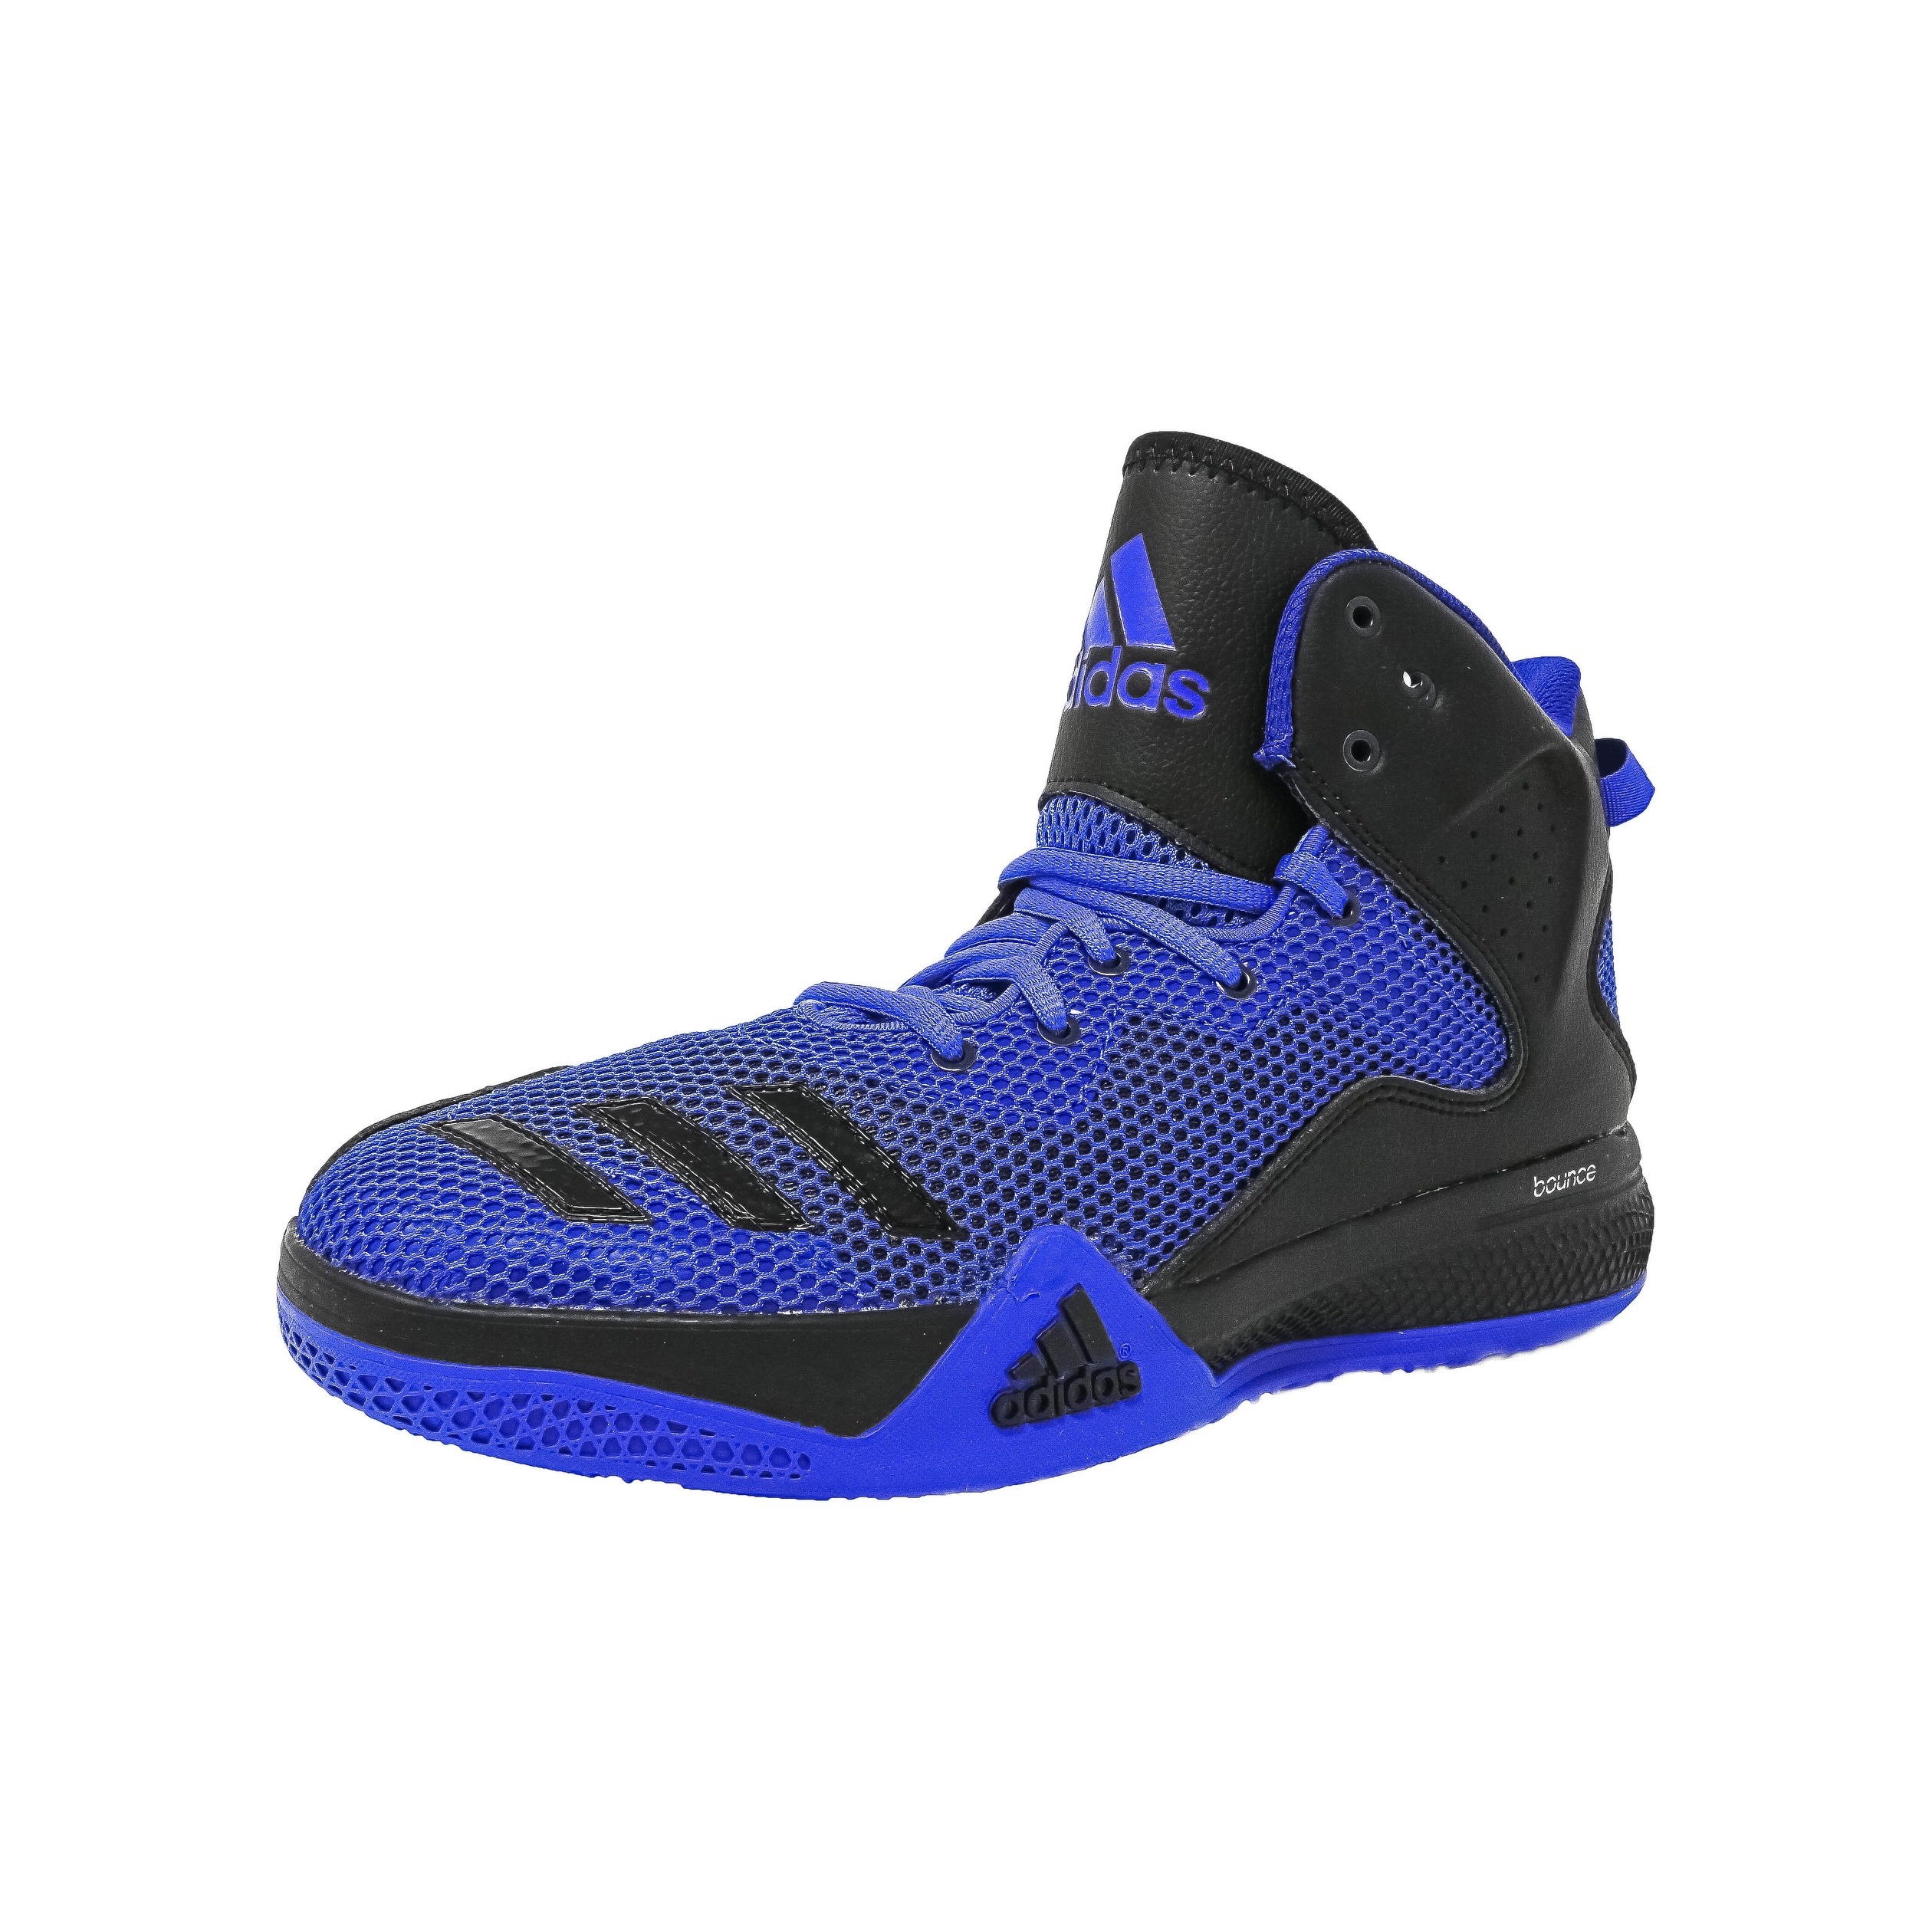 high ankle basketball shoes